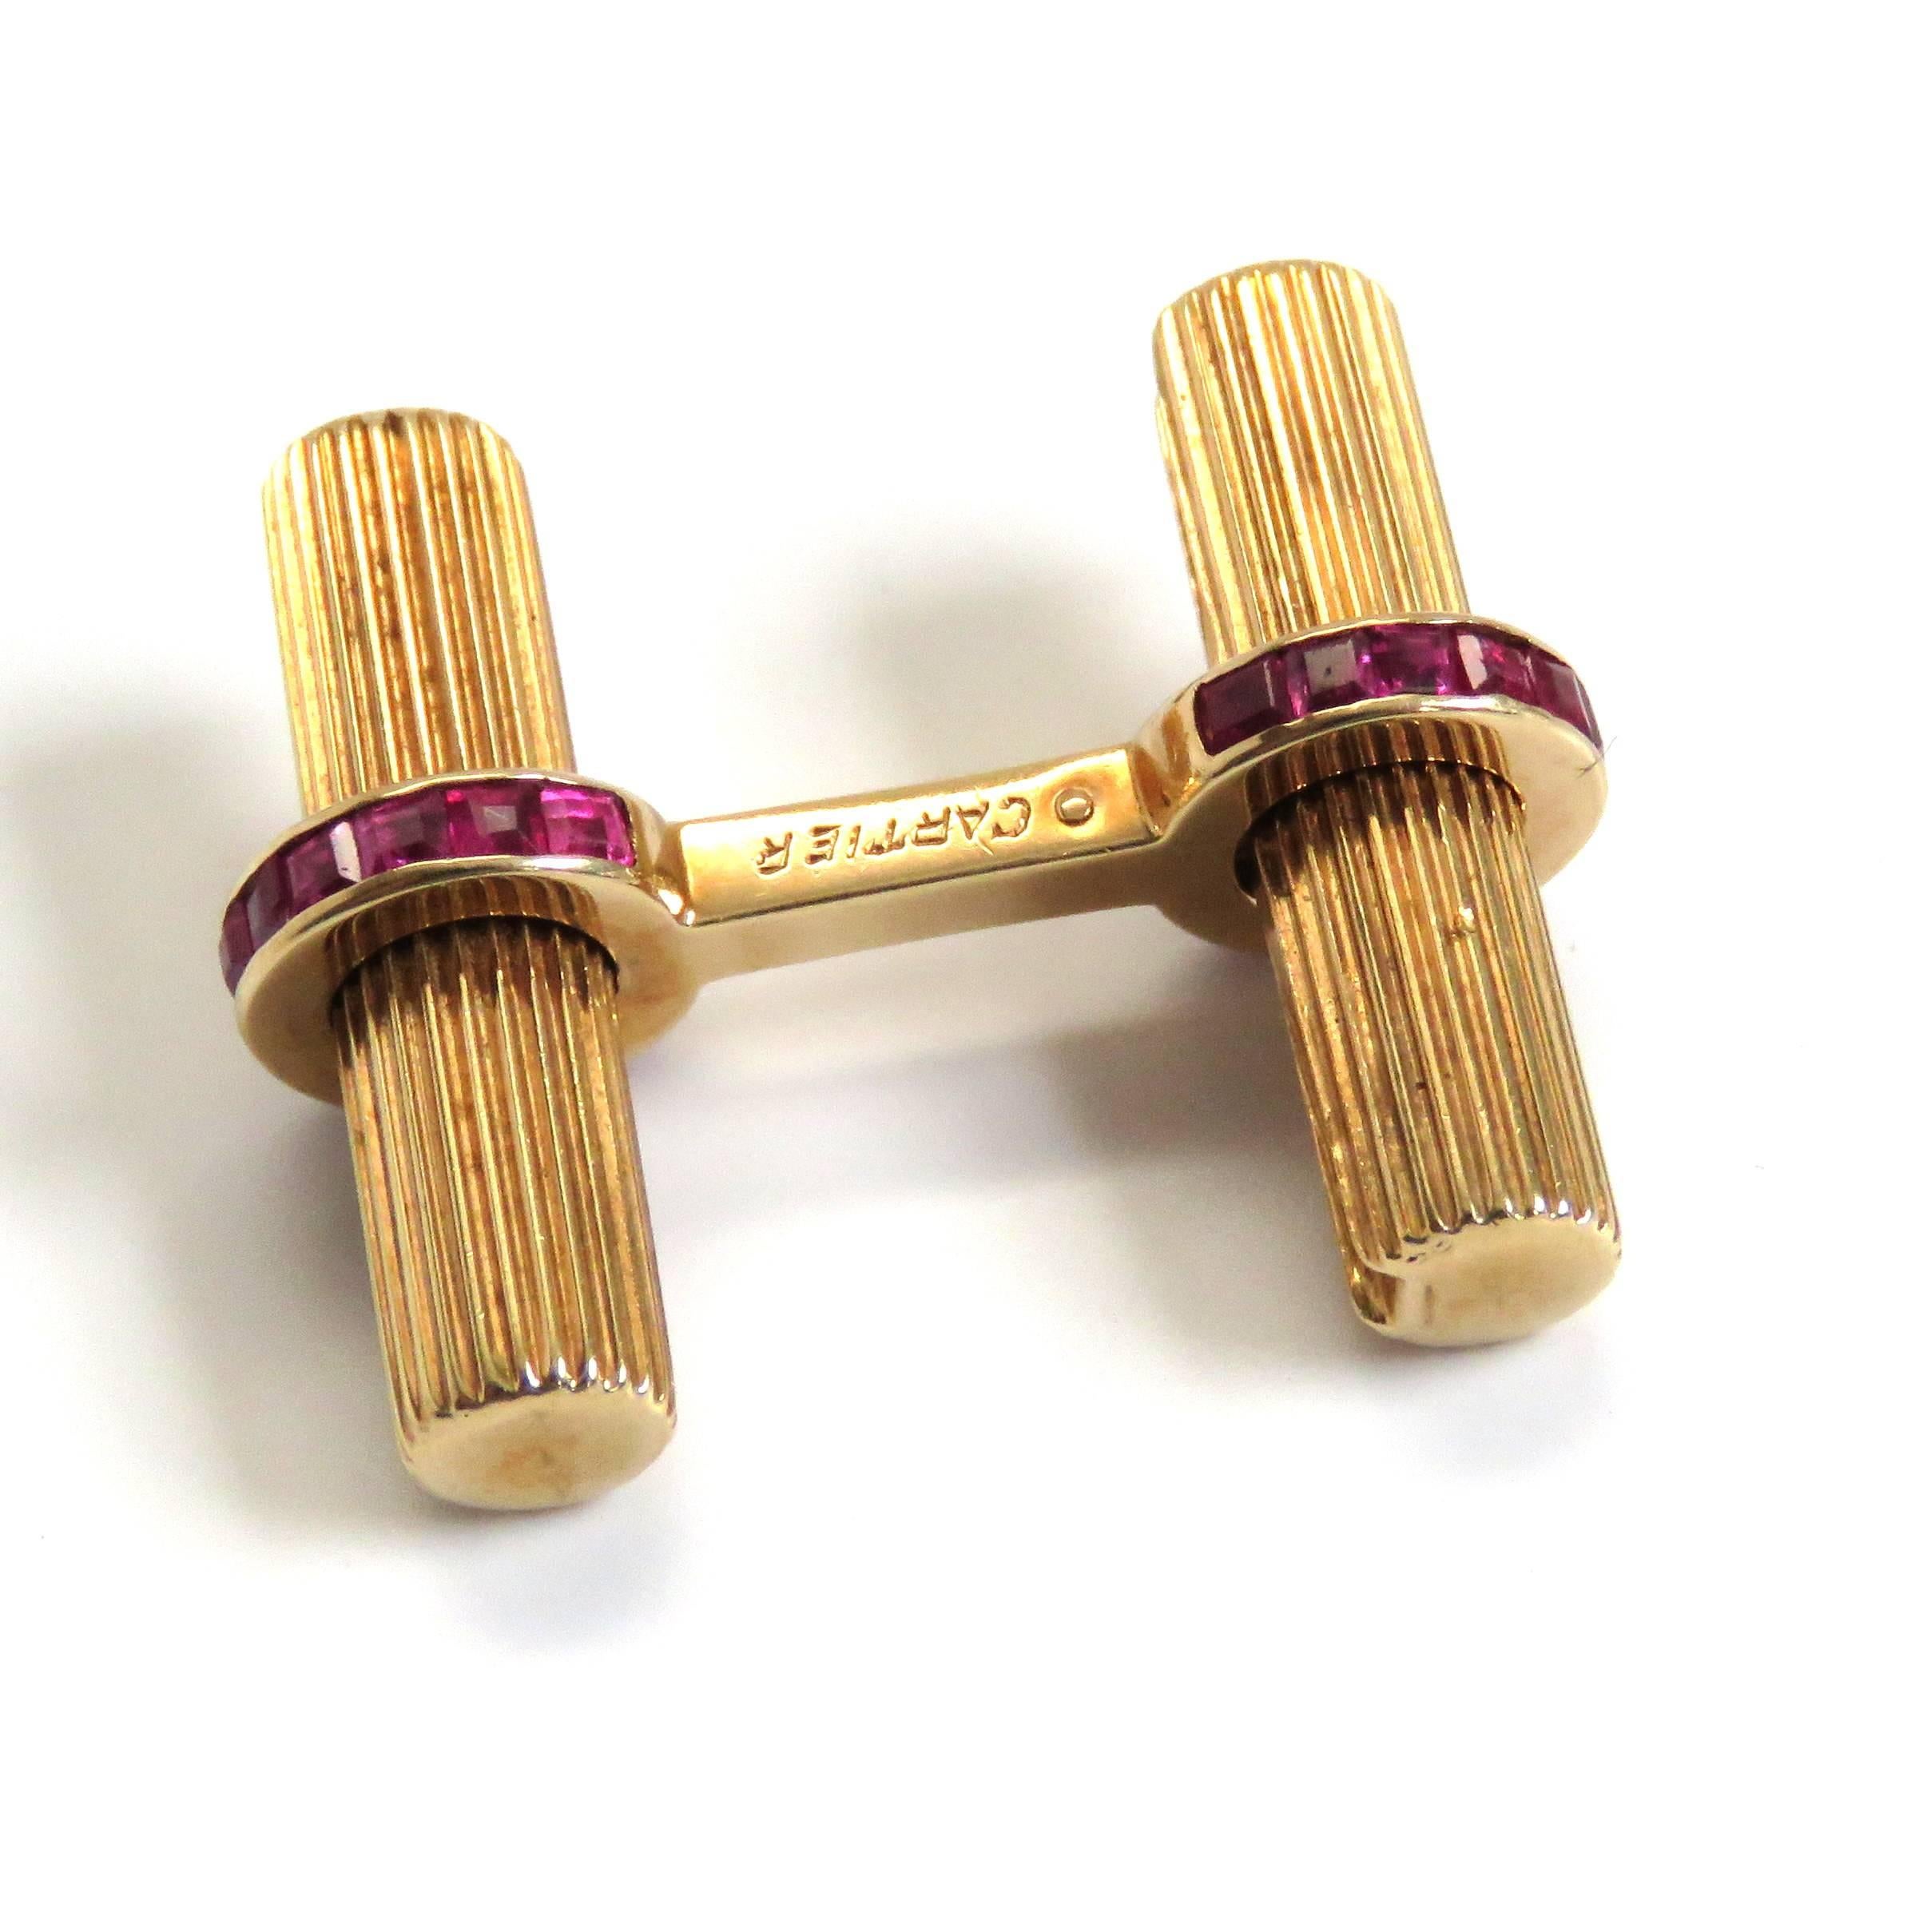 A pair of 14k yellow gold cufflinks set with rubies.  Crafted by Cartier, the cufflinks measure 22.7mm x 9mm and weigh 11.2 grams.  Marked: Cartier, 14k, (Serial number faded).